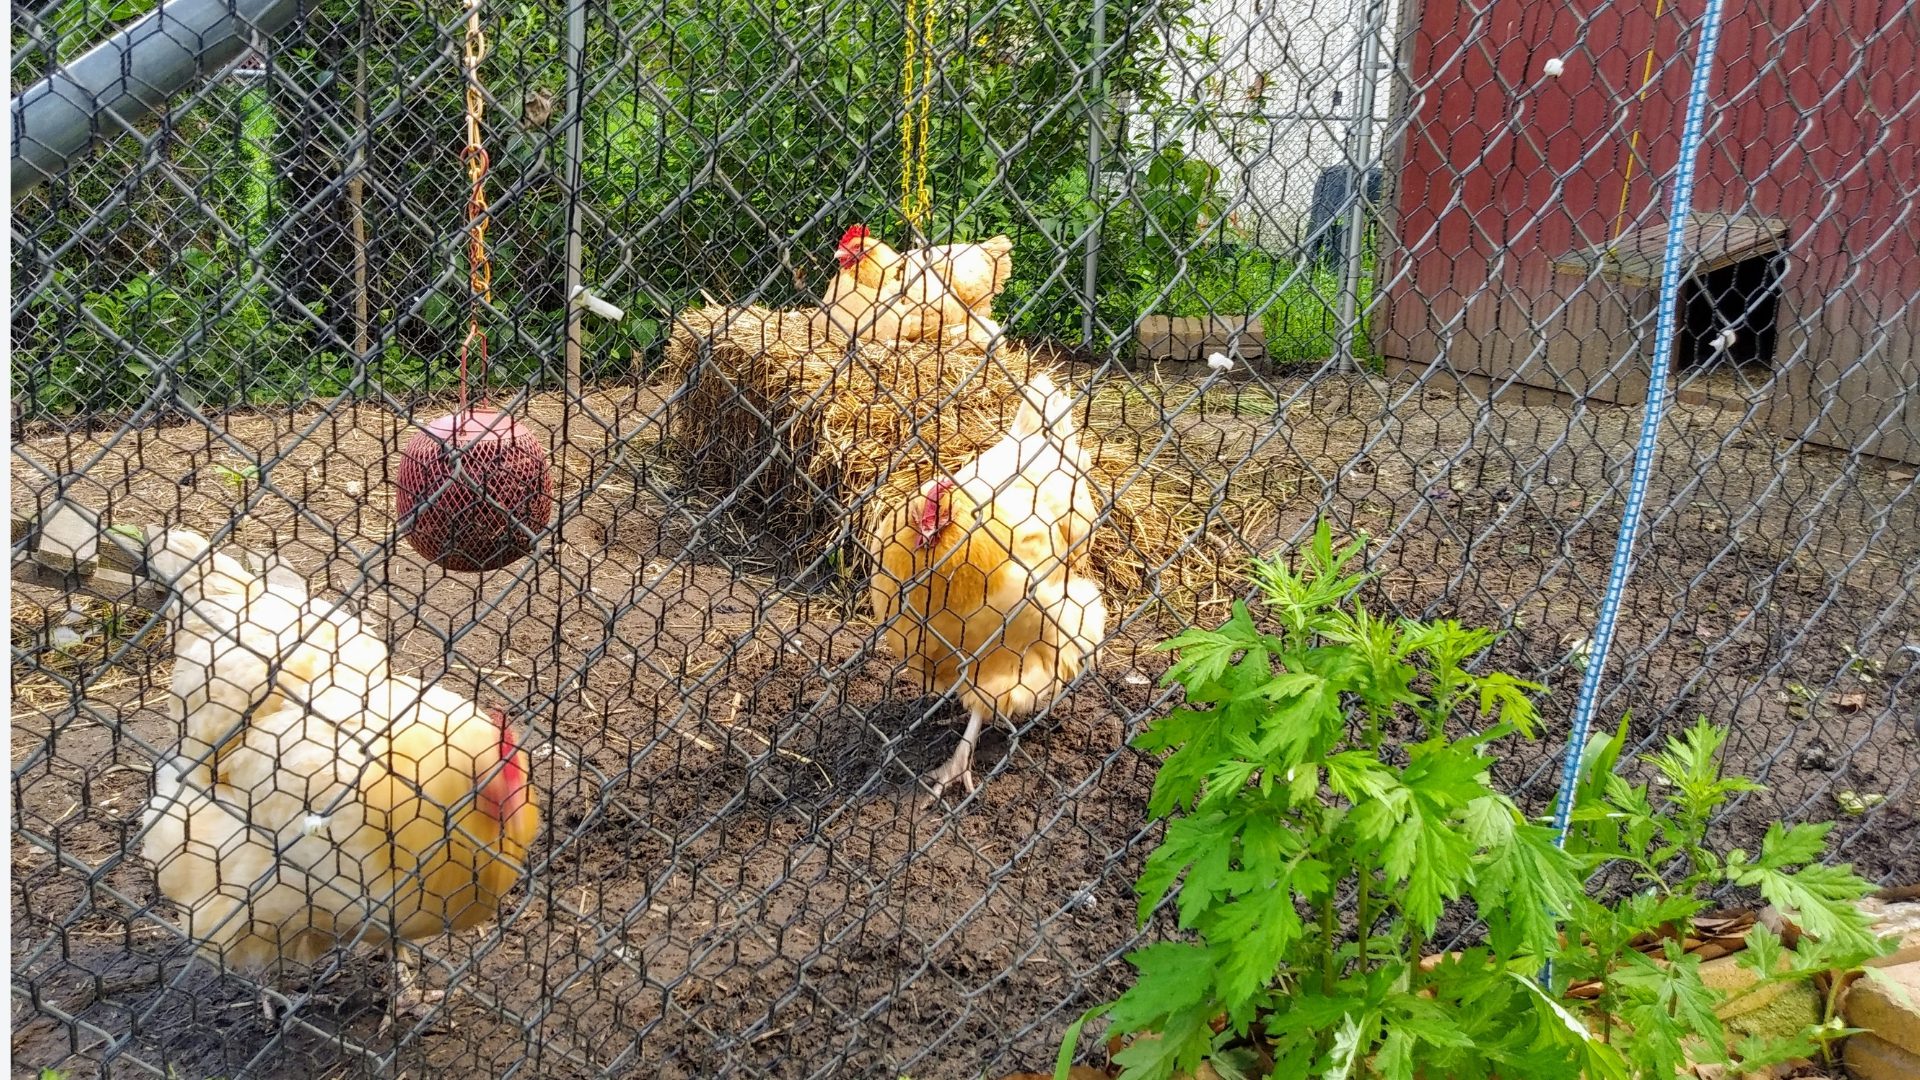 A chicken is standing in the dirt behind a fence.